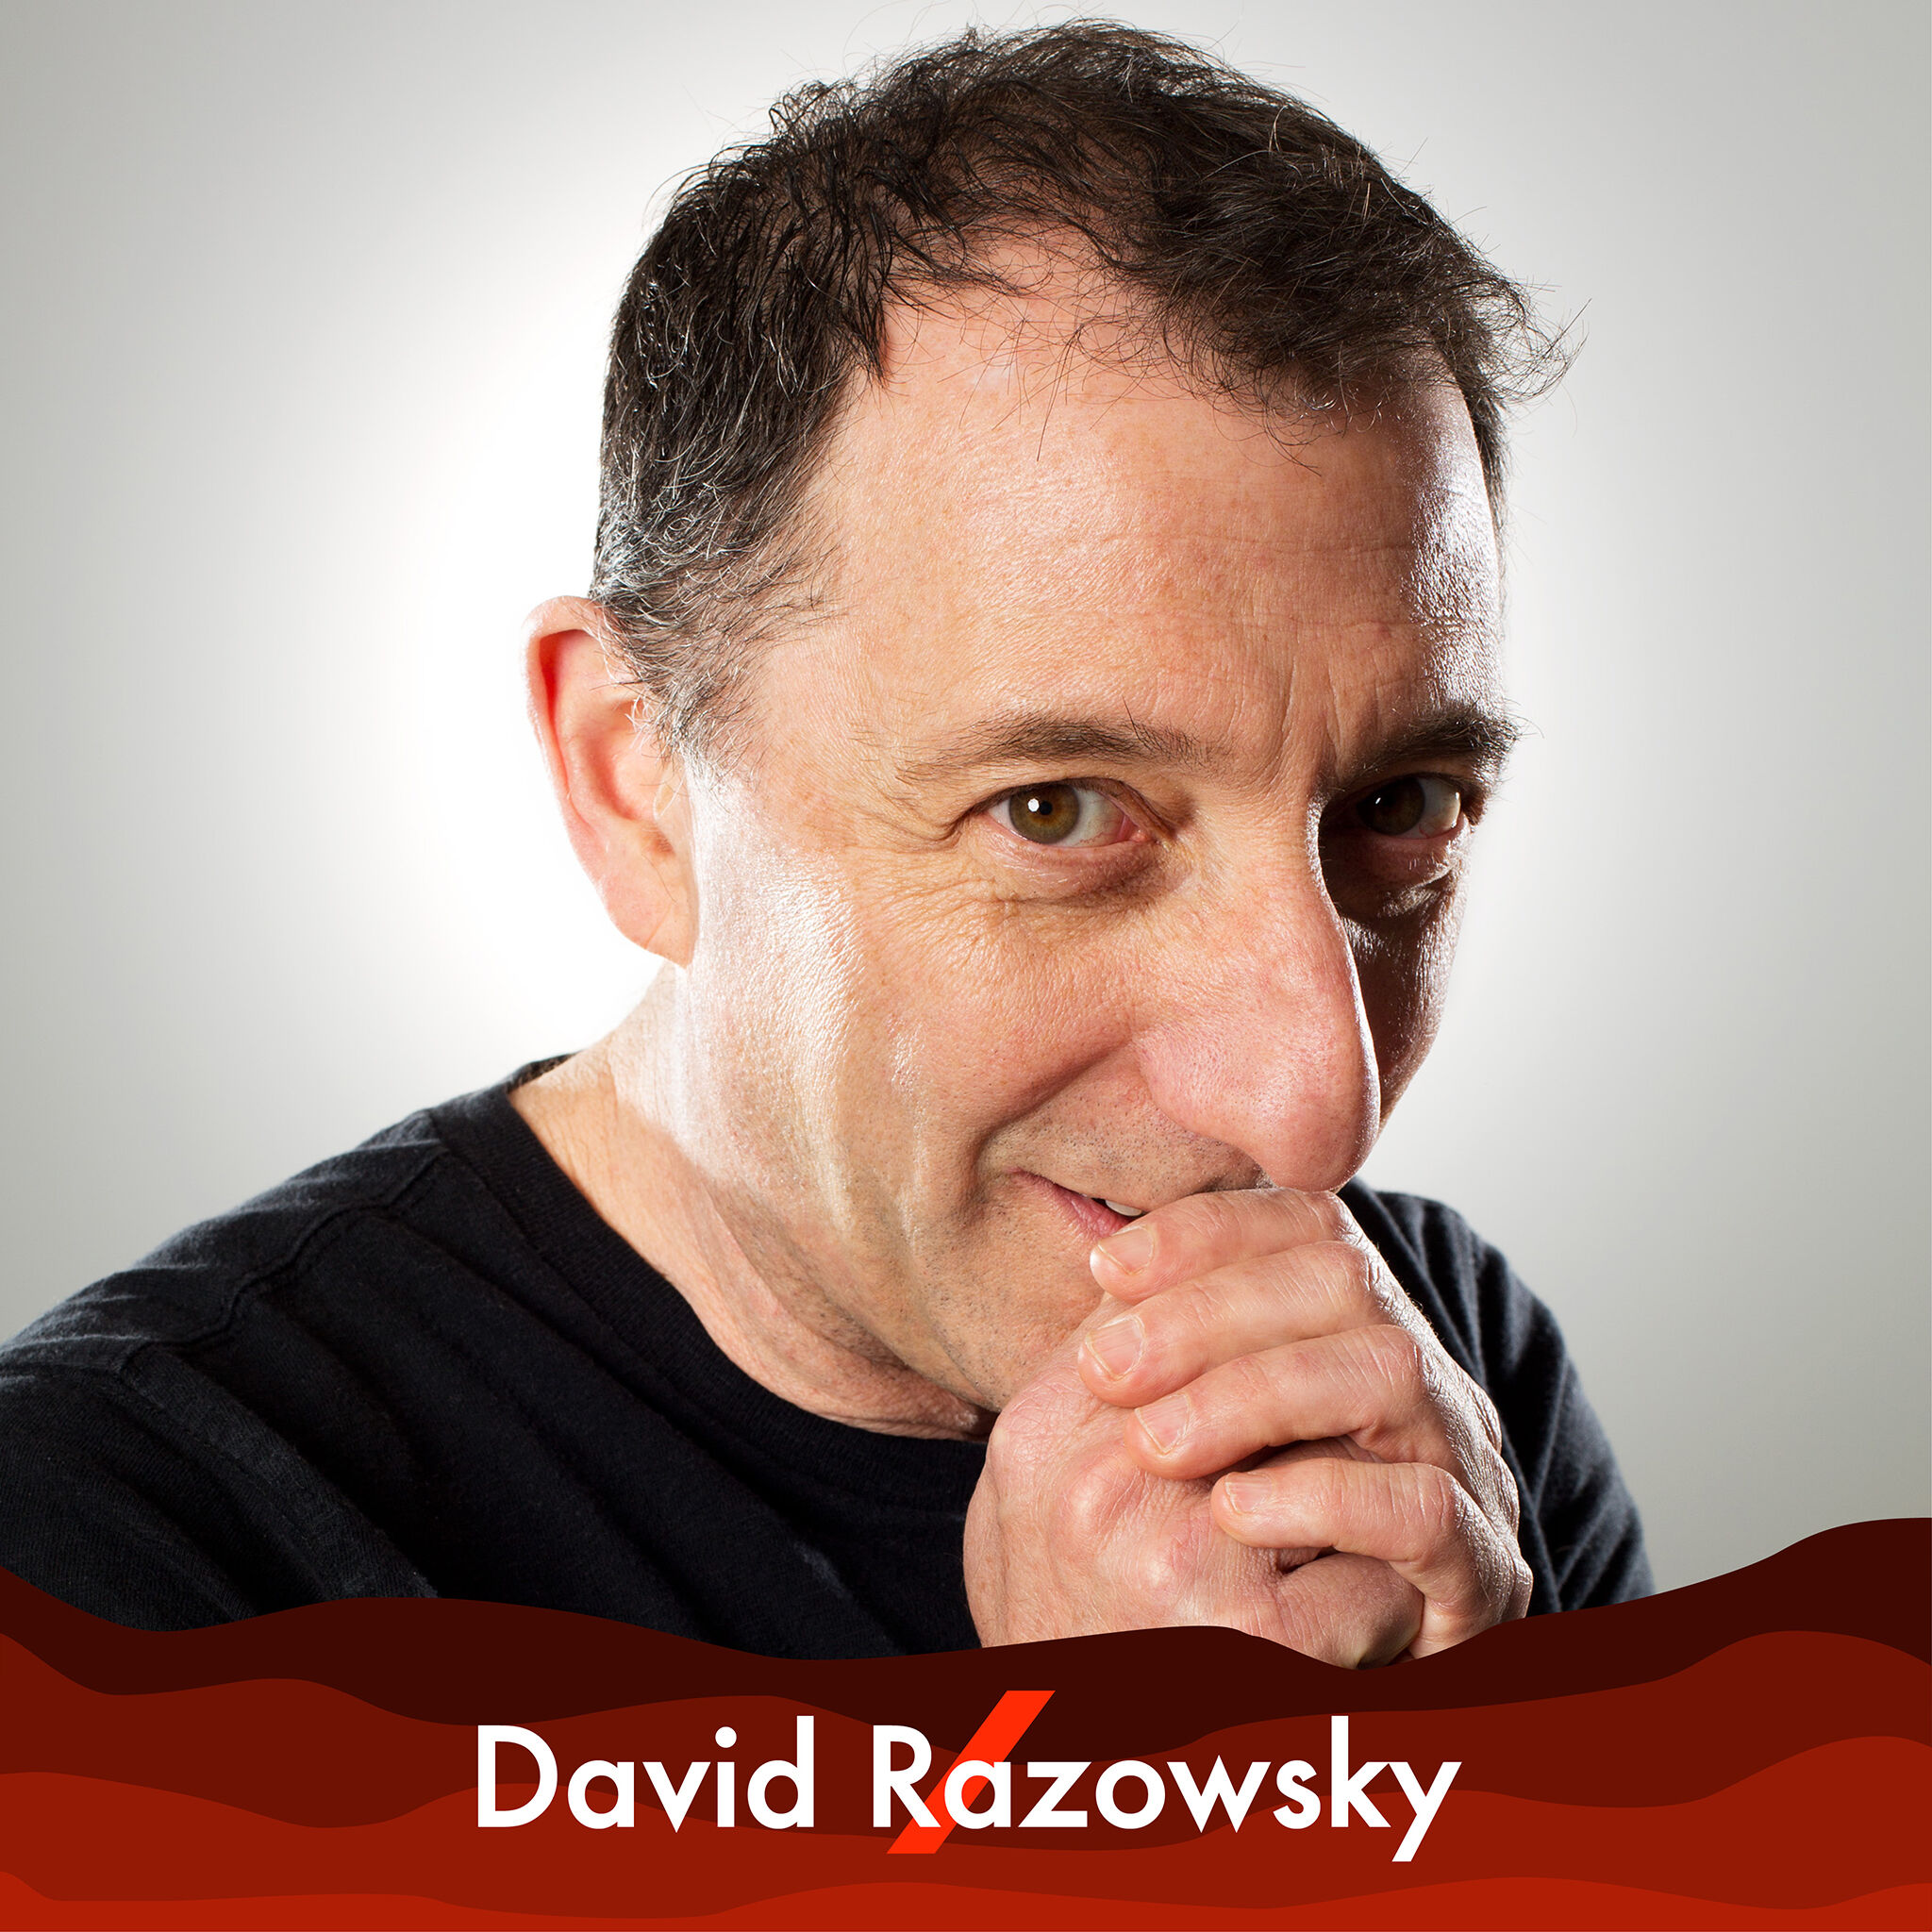 A picture of David Razowsky